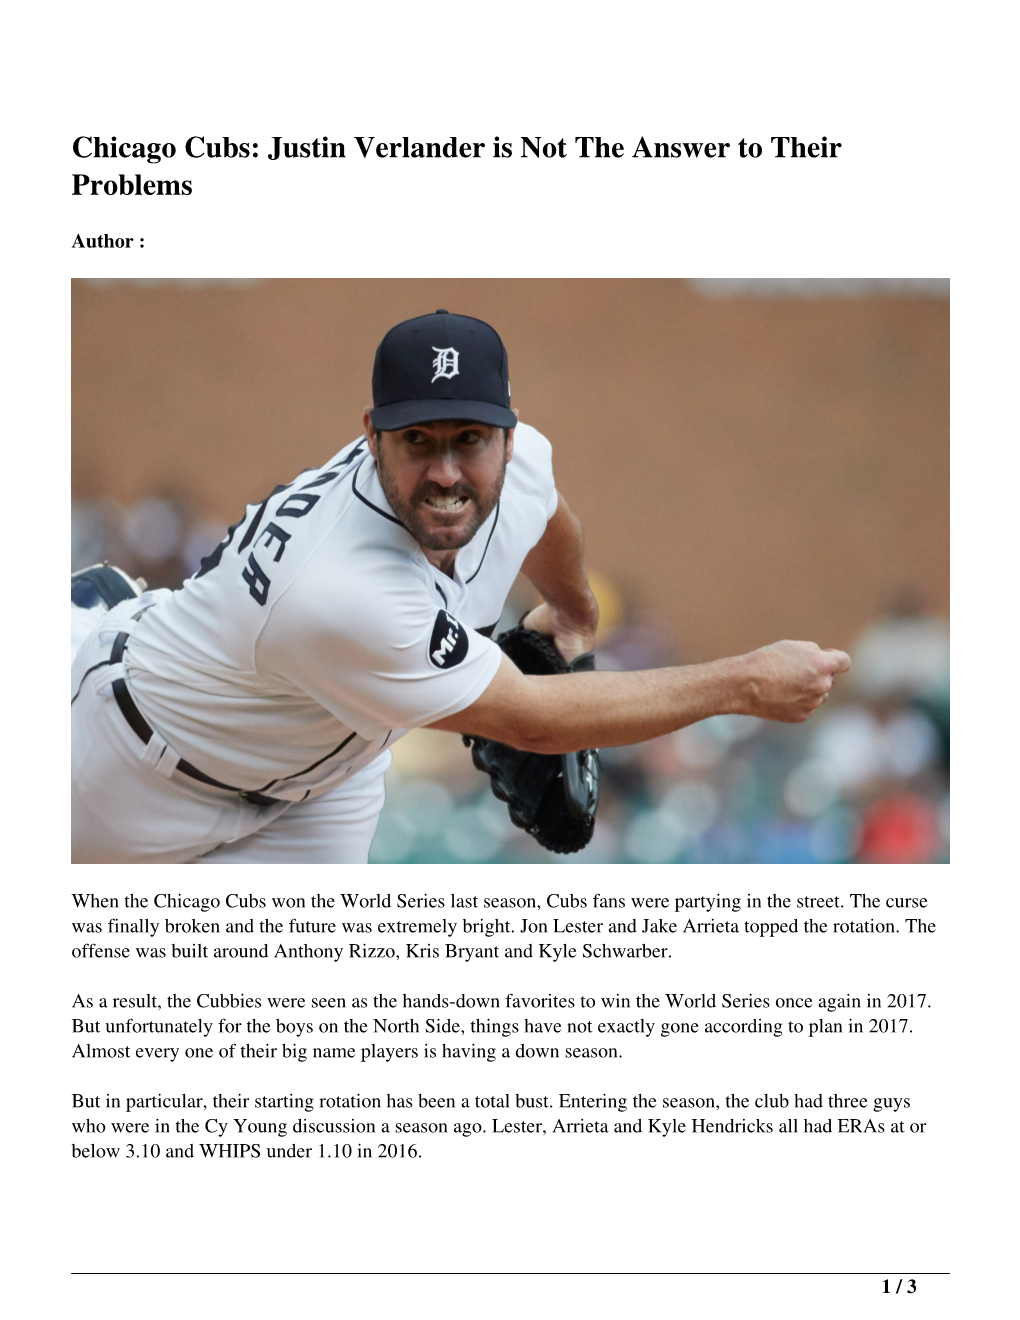 Chicago Cubs: Justin Verlander Is Not the Answer to Their Problems